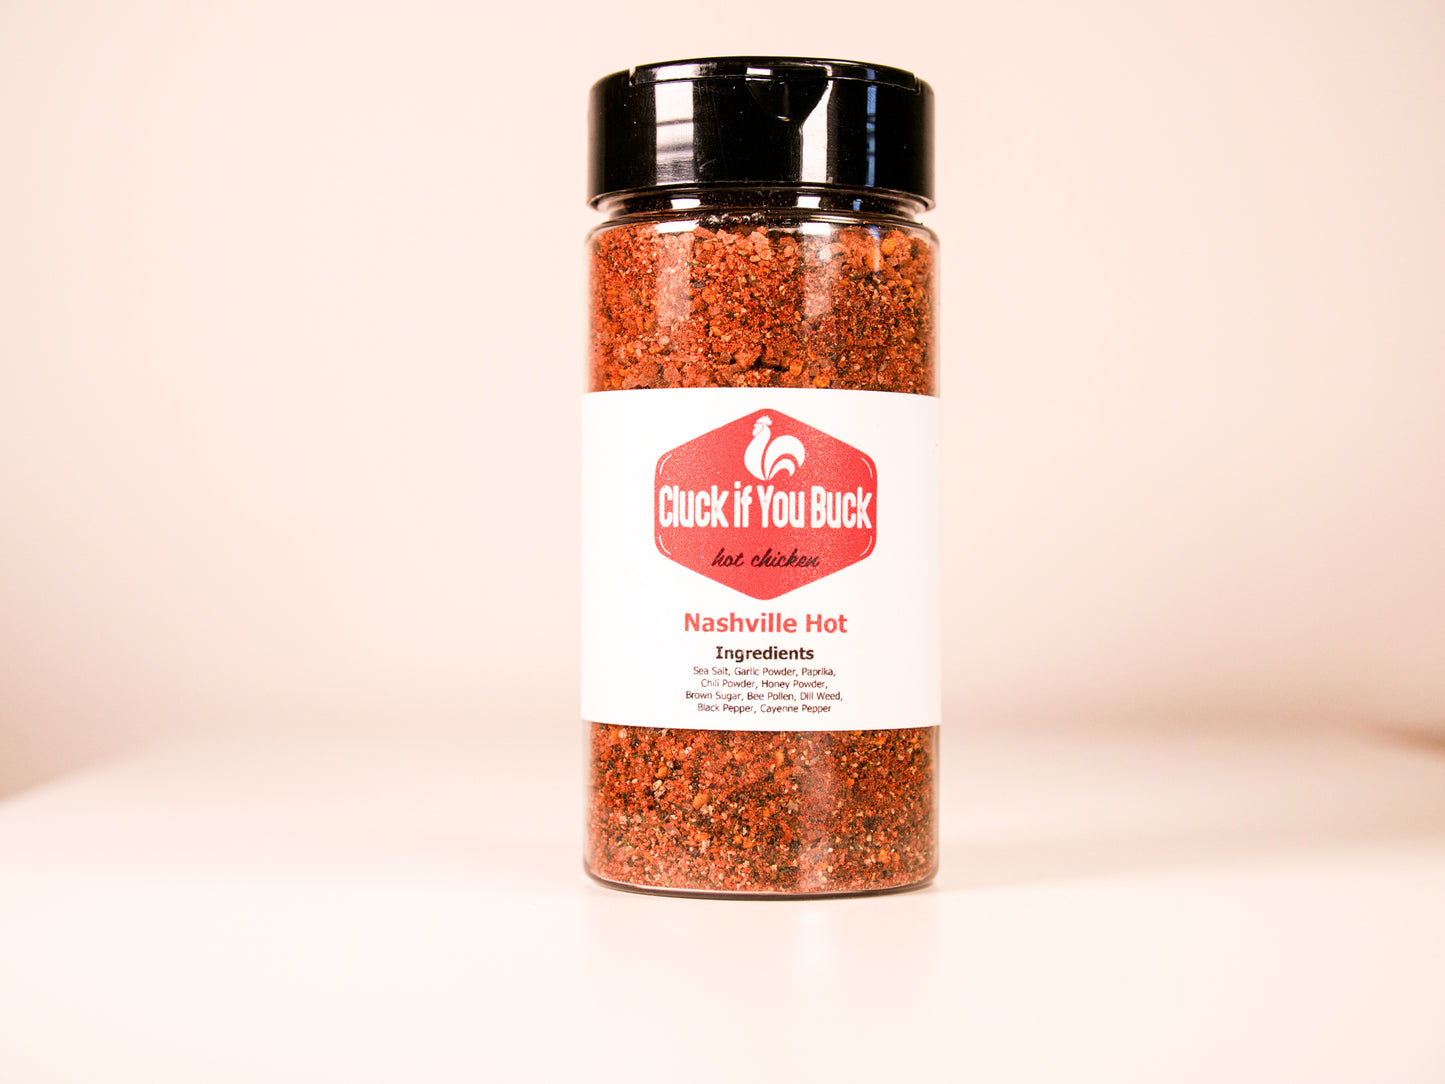 Cluck if You Buck - Variety Pack - Sweet Heat Sea Salt, All-Purpose Chicken, Rib, Brisket, Greens, Tofu, Pork BBQ Rubs and Spices for Frying, Smoking and Grilling - No MSG, Gluten Free